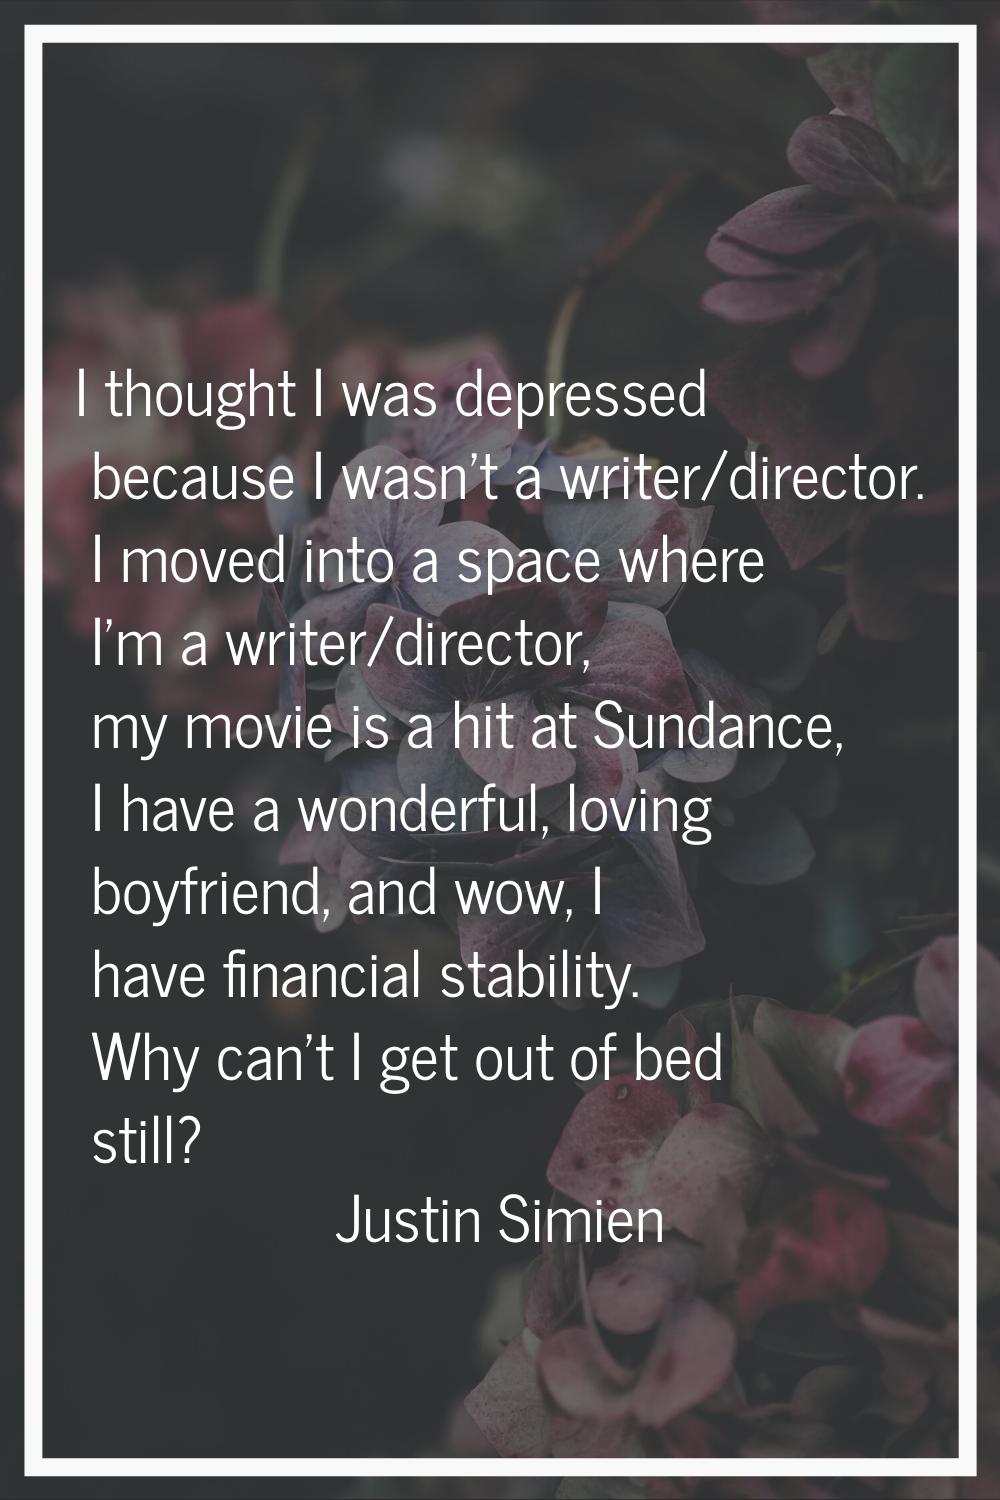 I thought I was depressed because I wasn't a writer/director. I moved into a space where I'm a writ